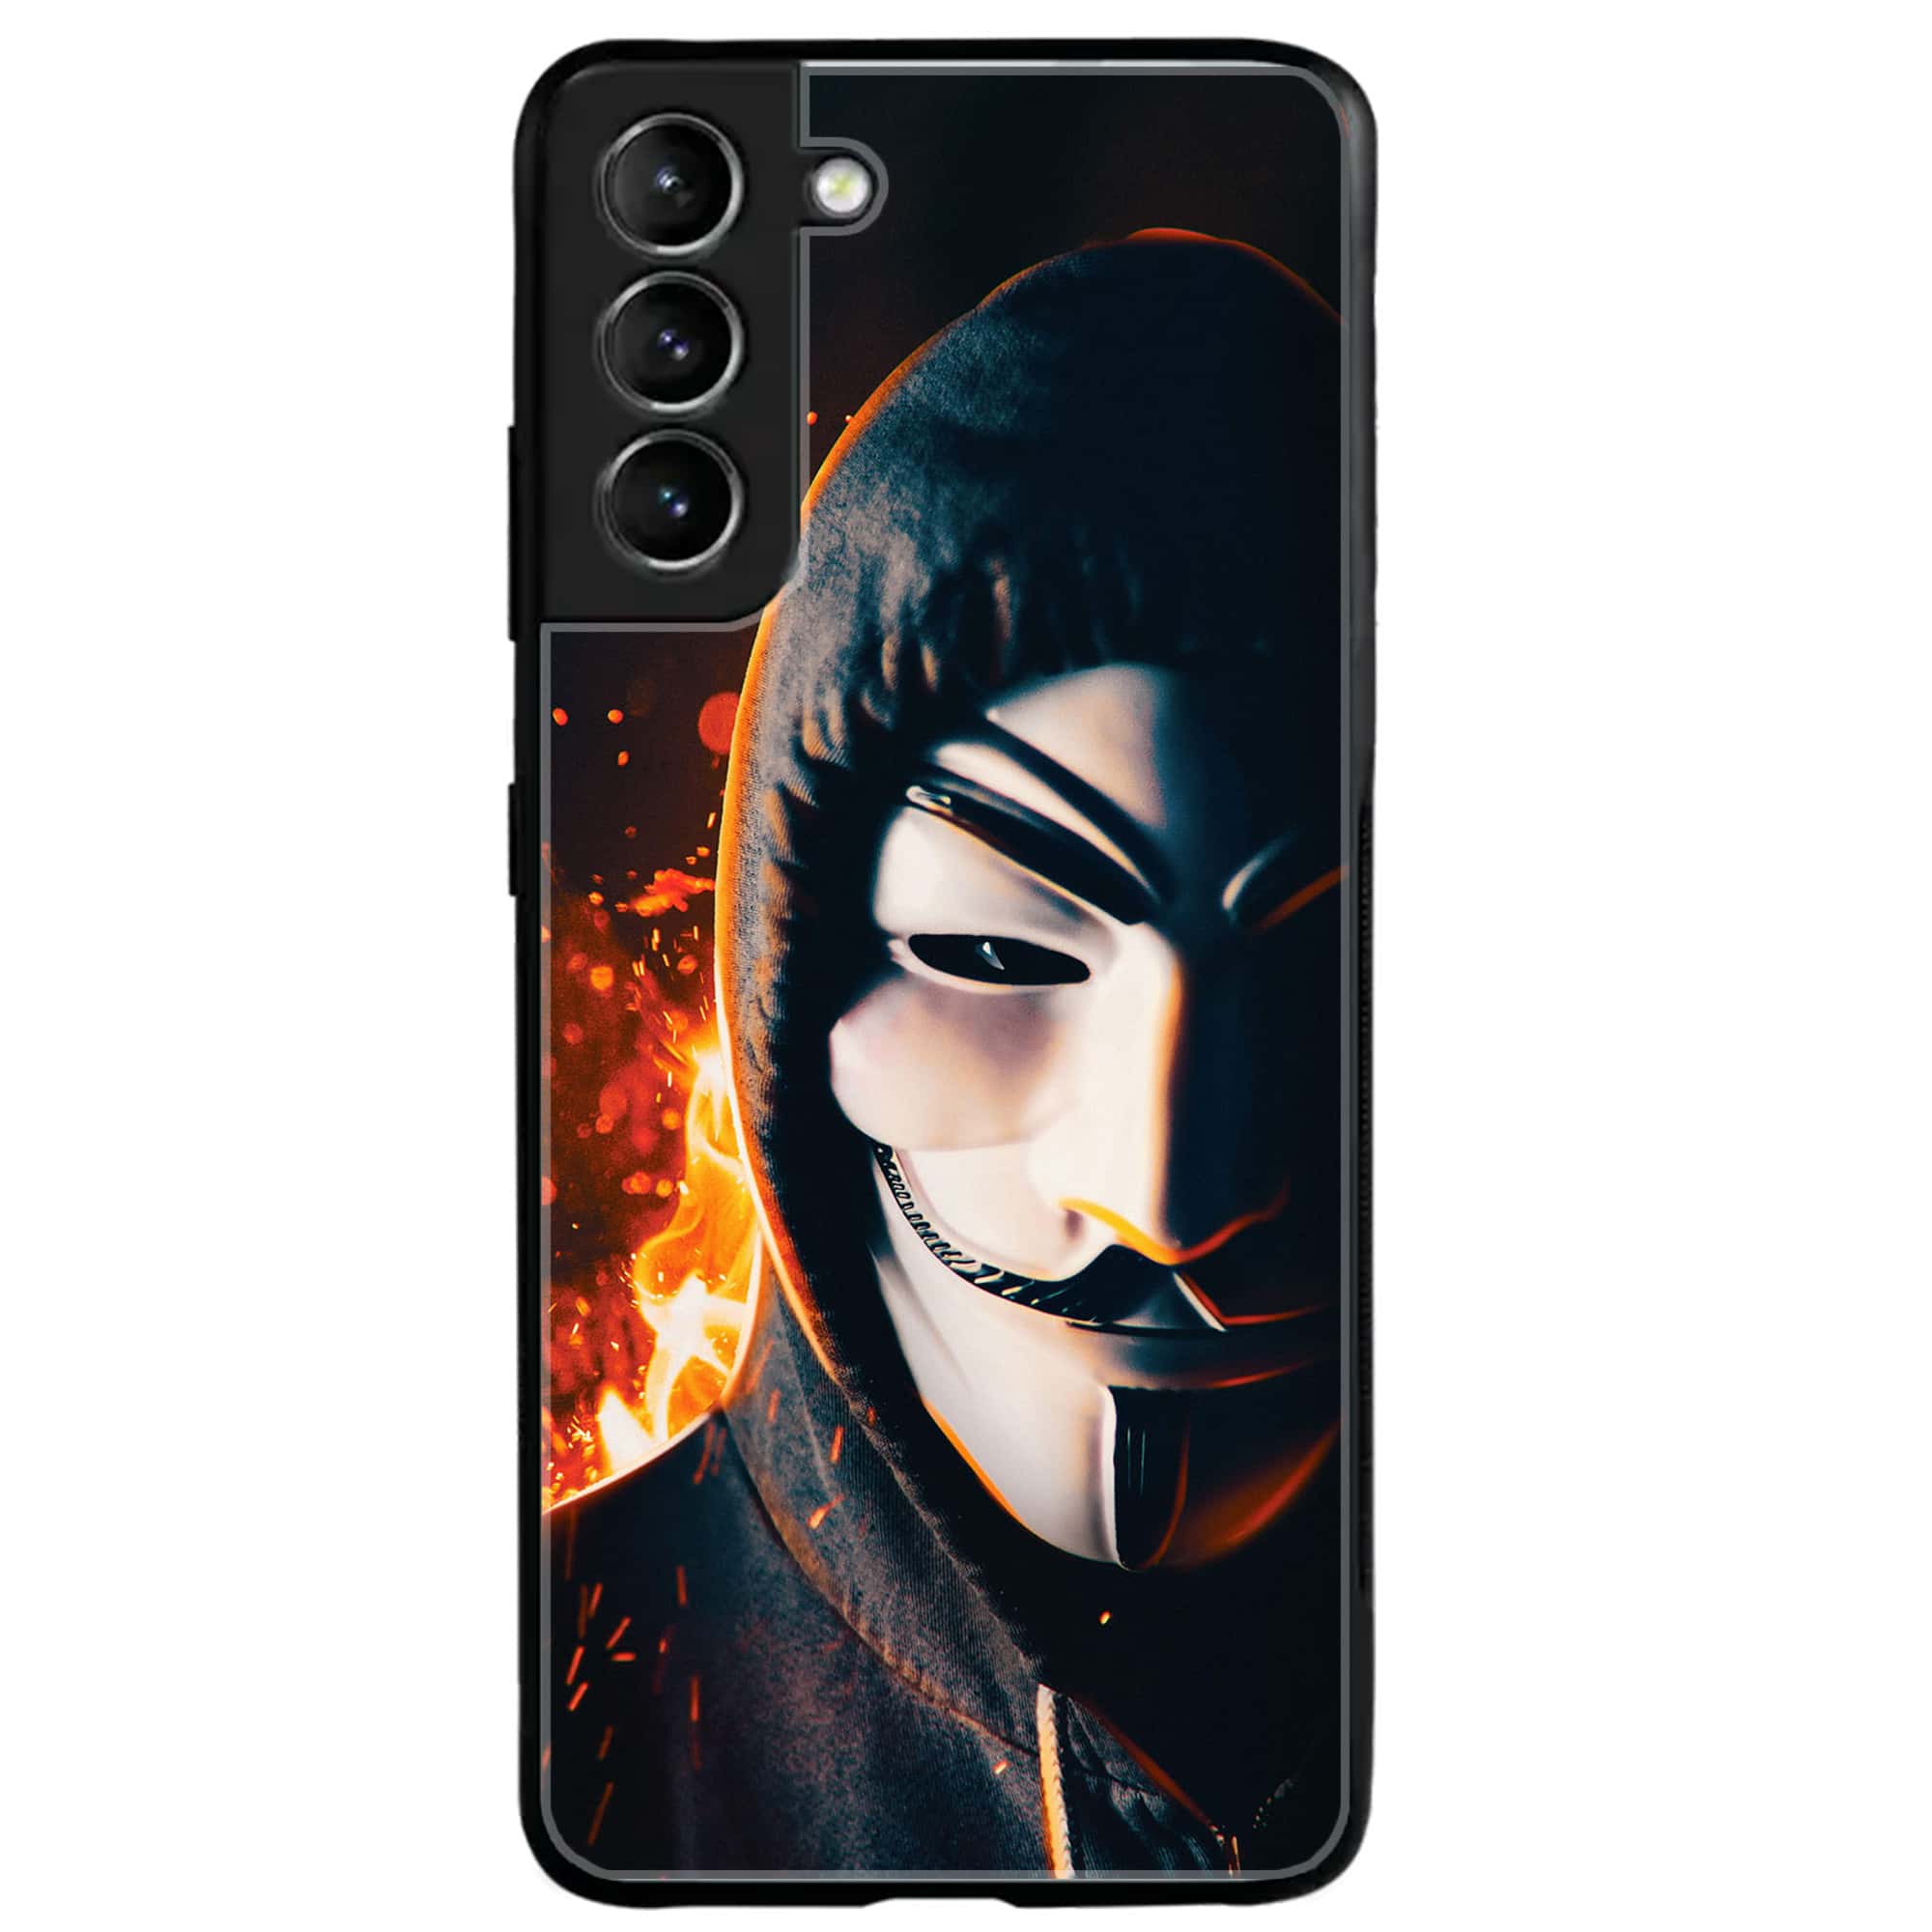 Samsung Galaxy S21 - Anonymous 2.0 Series - Premium Printed Glass soft Bumper shock Proof Case